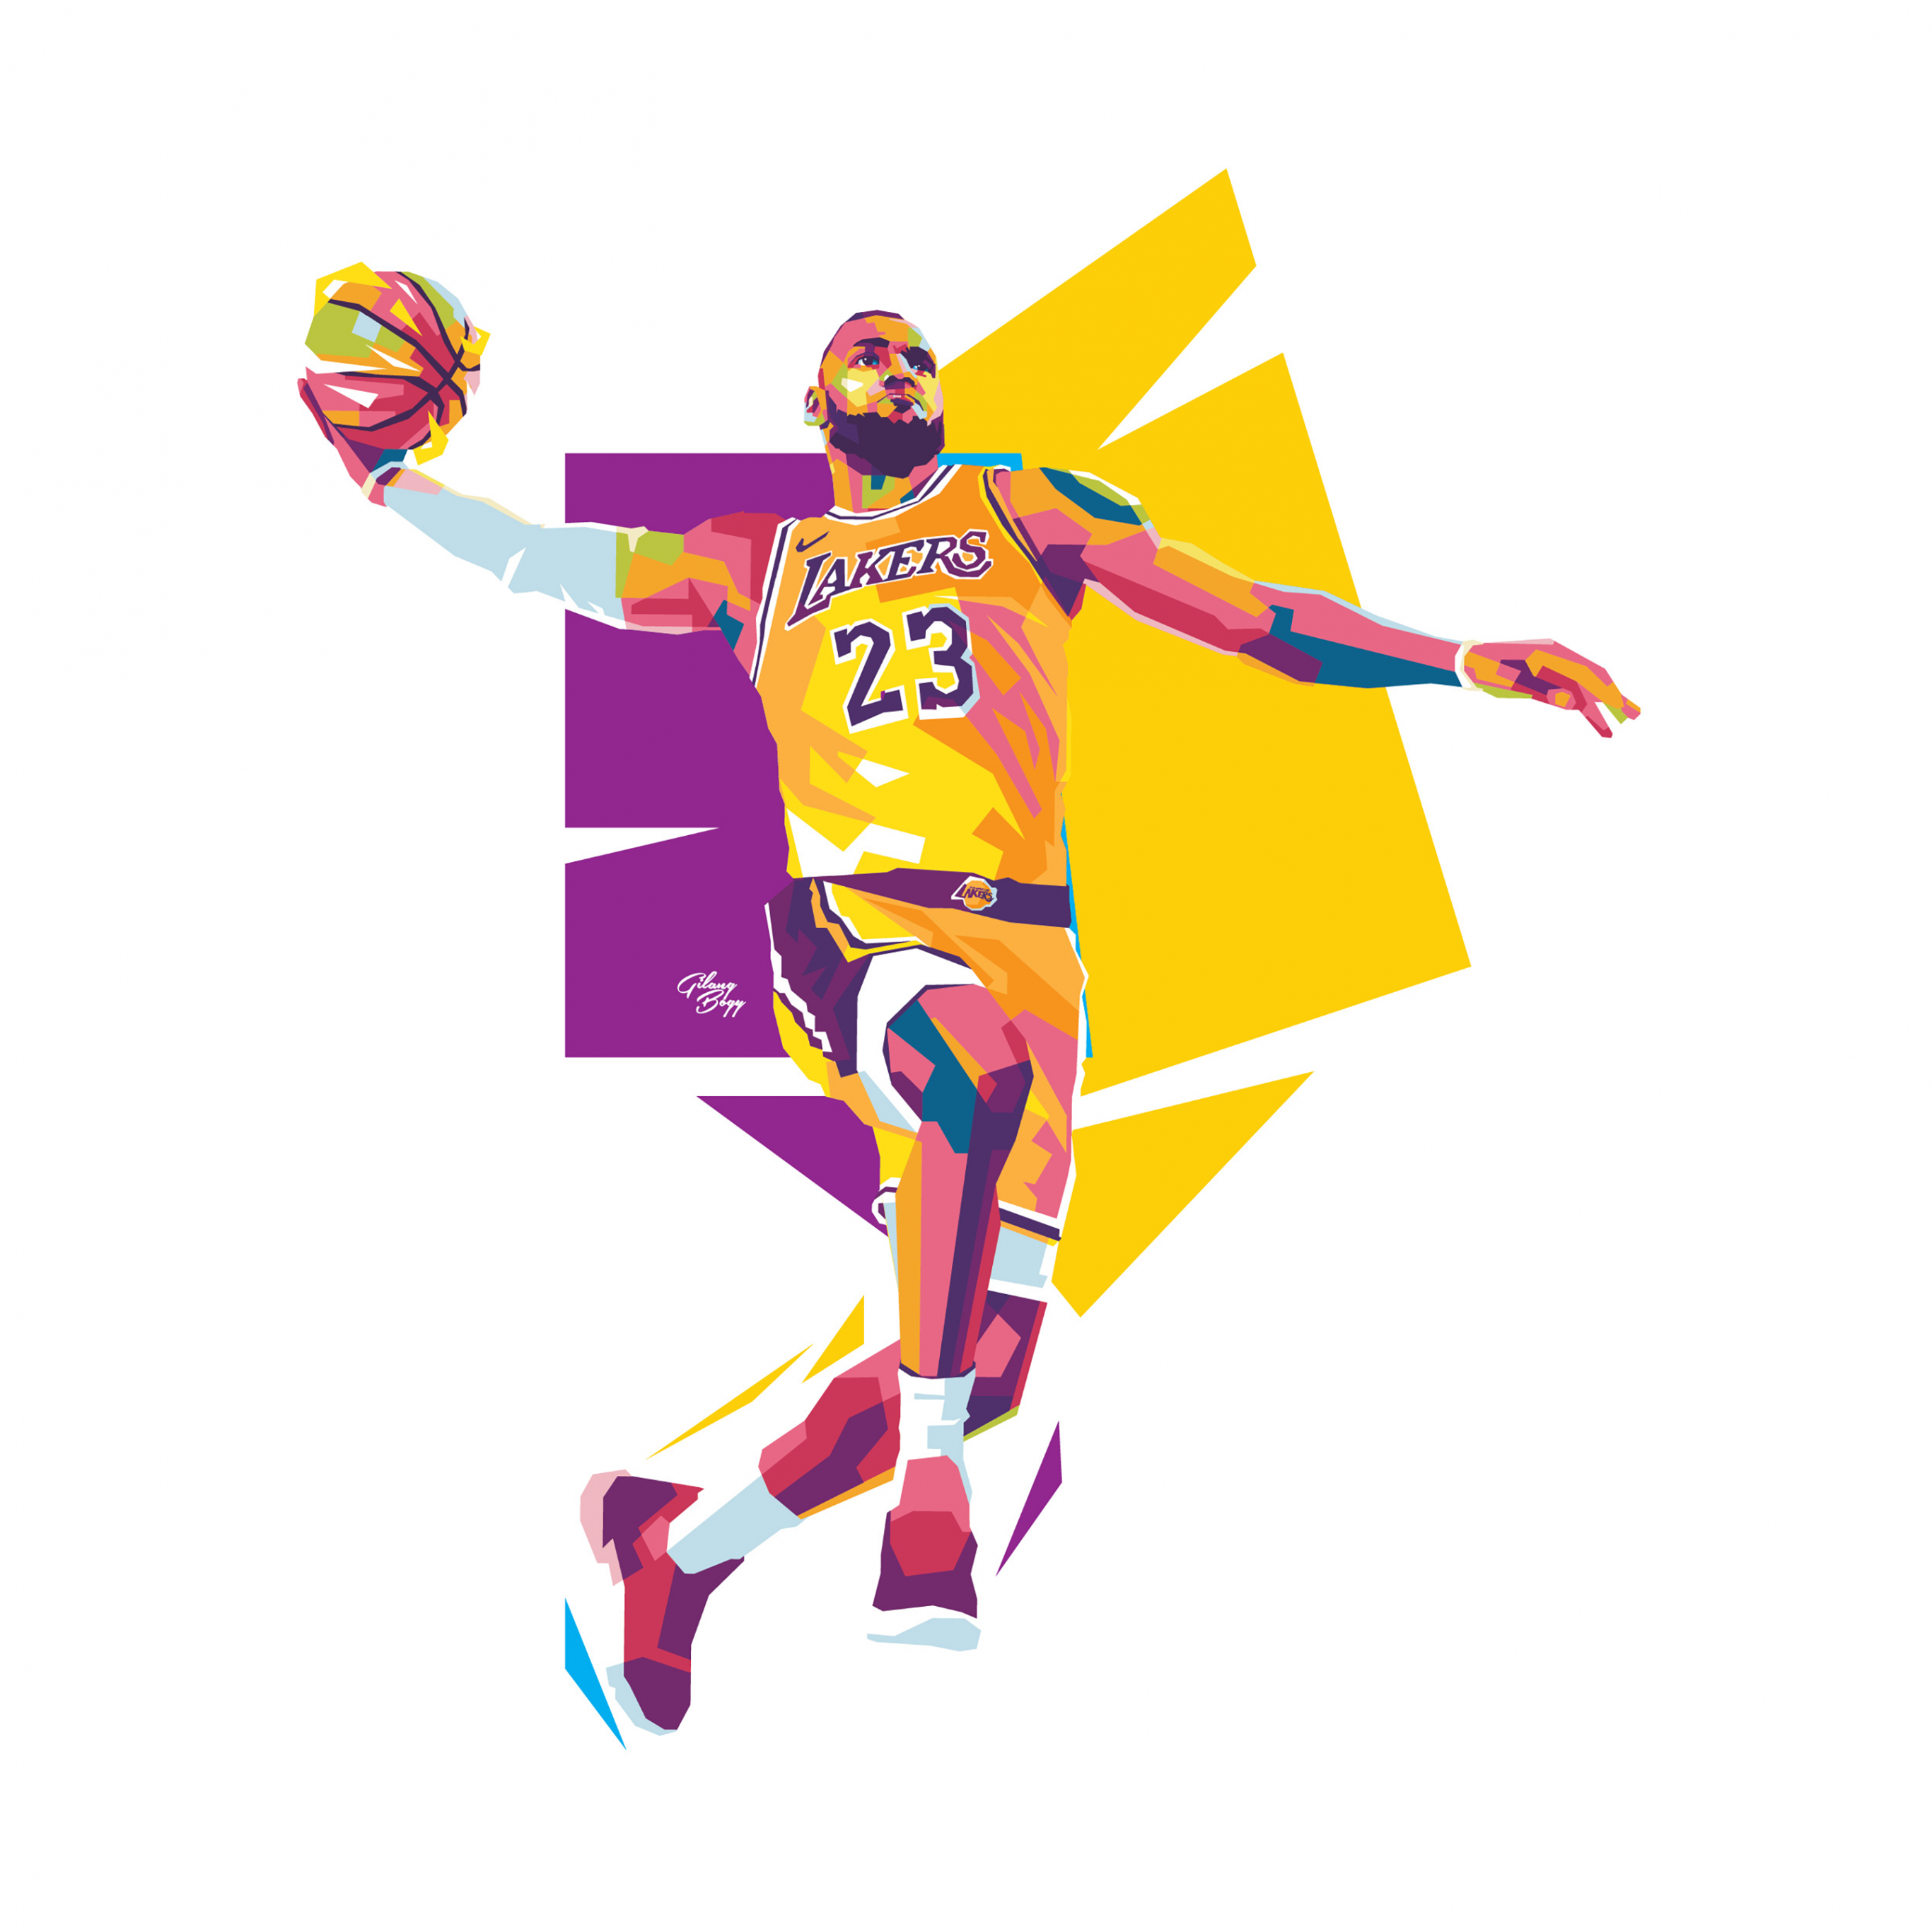 LeBron James Lakers iPhone Wallpapers  2023 Basketball Wallpaper  Lebron  james lakers Lebron james Lebron james poster